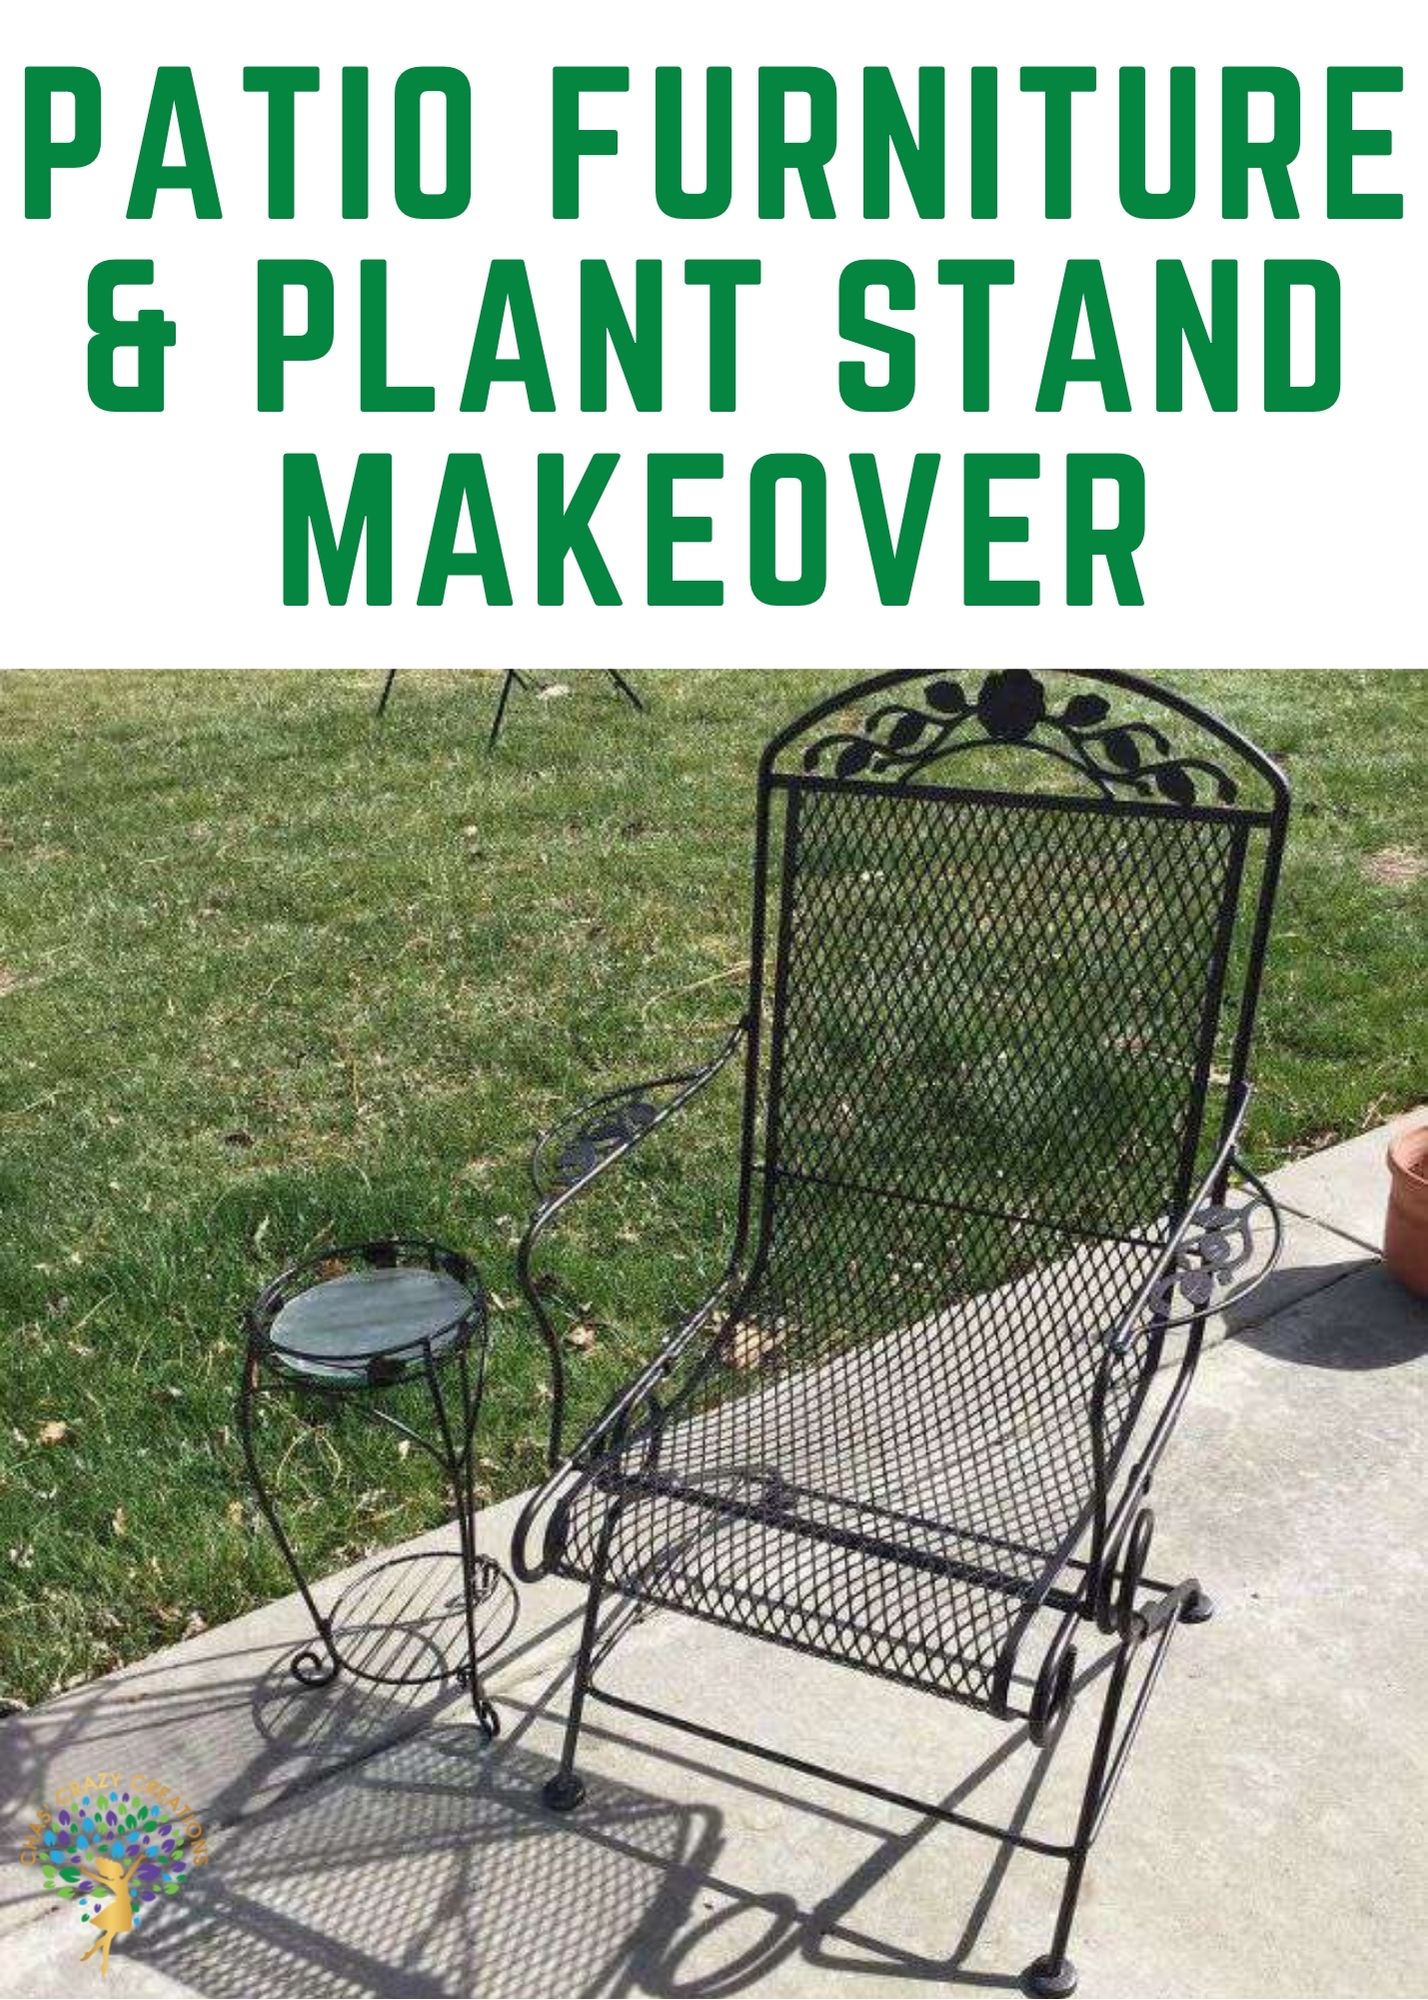 See how I repurposed a plant stand and patio furniture. The plant stand was turned into a side table. You can use these steps to update yours